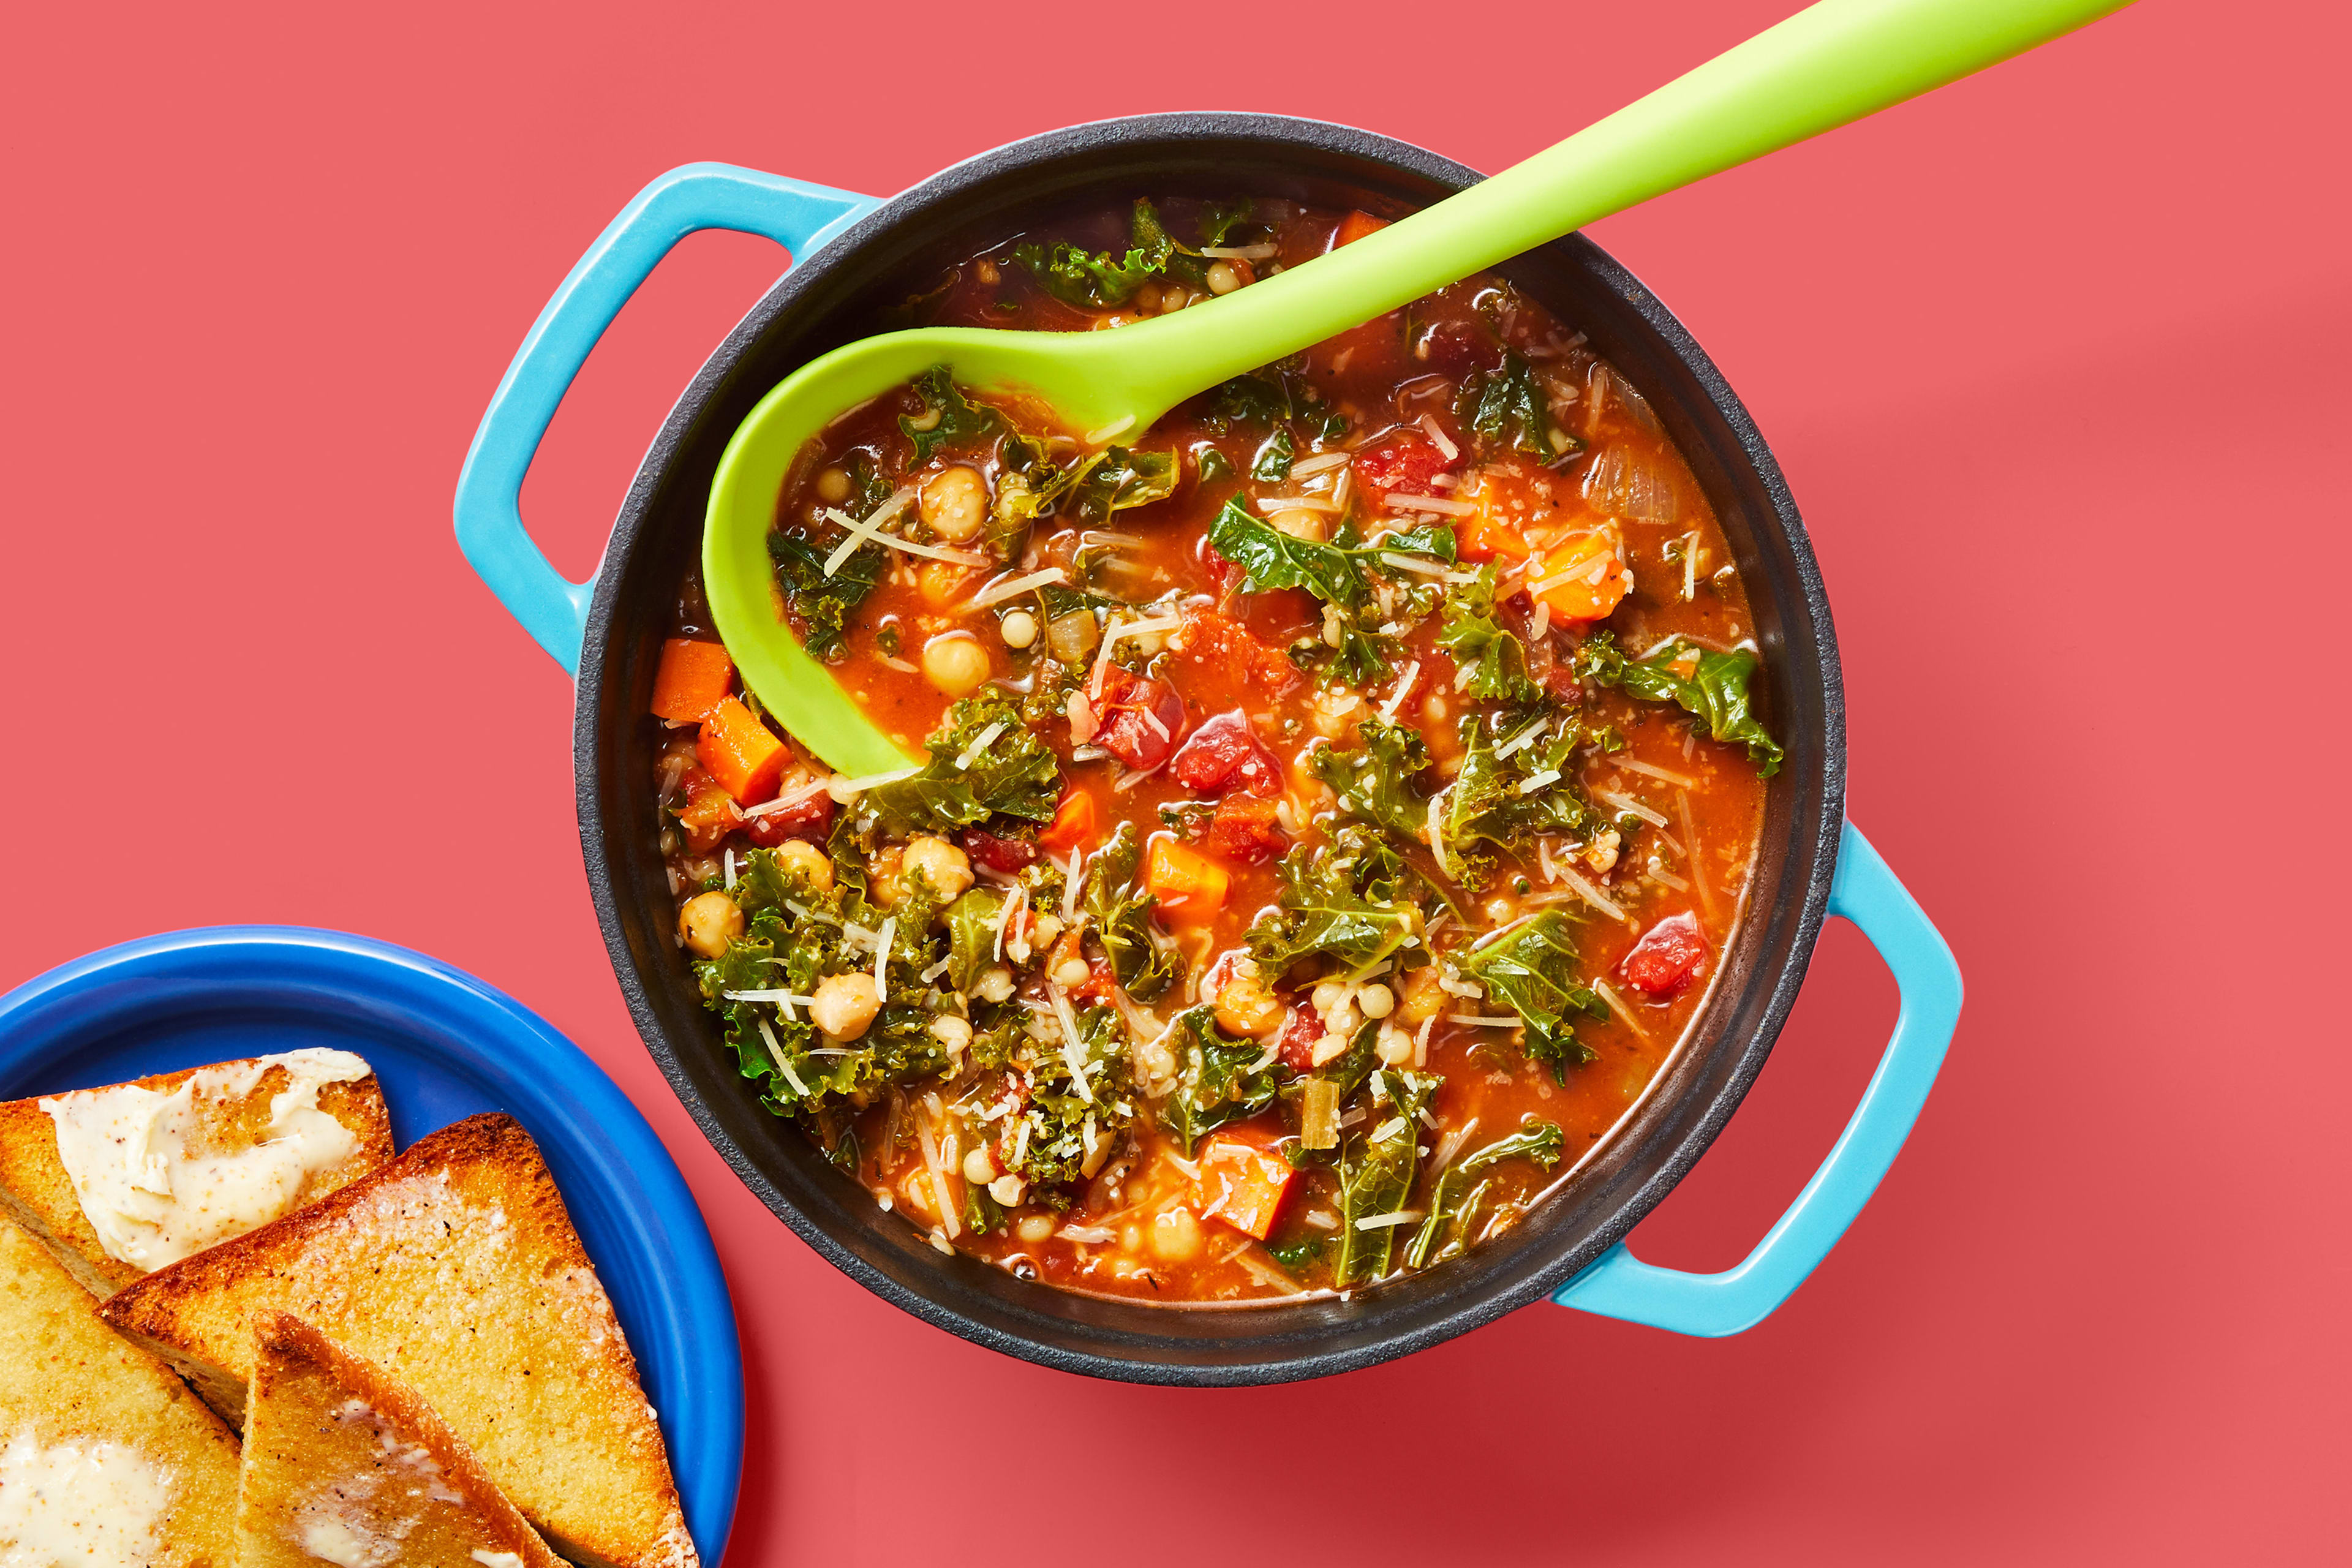 All in One Pot Meals & Dinner Recipes for Every Occasion